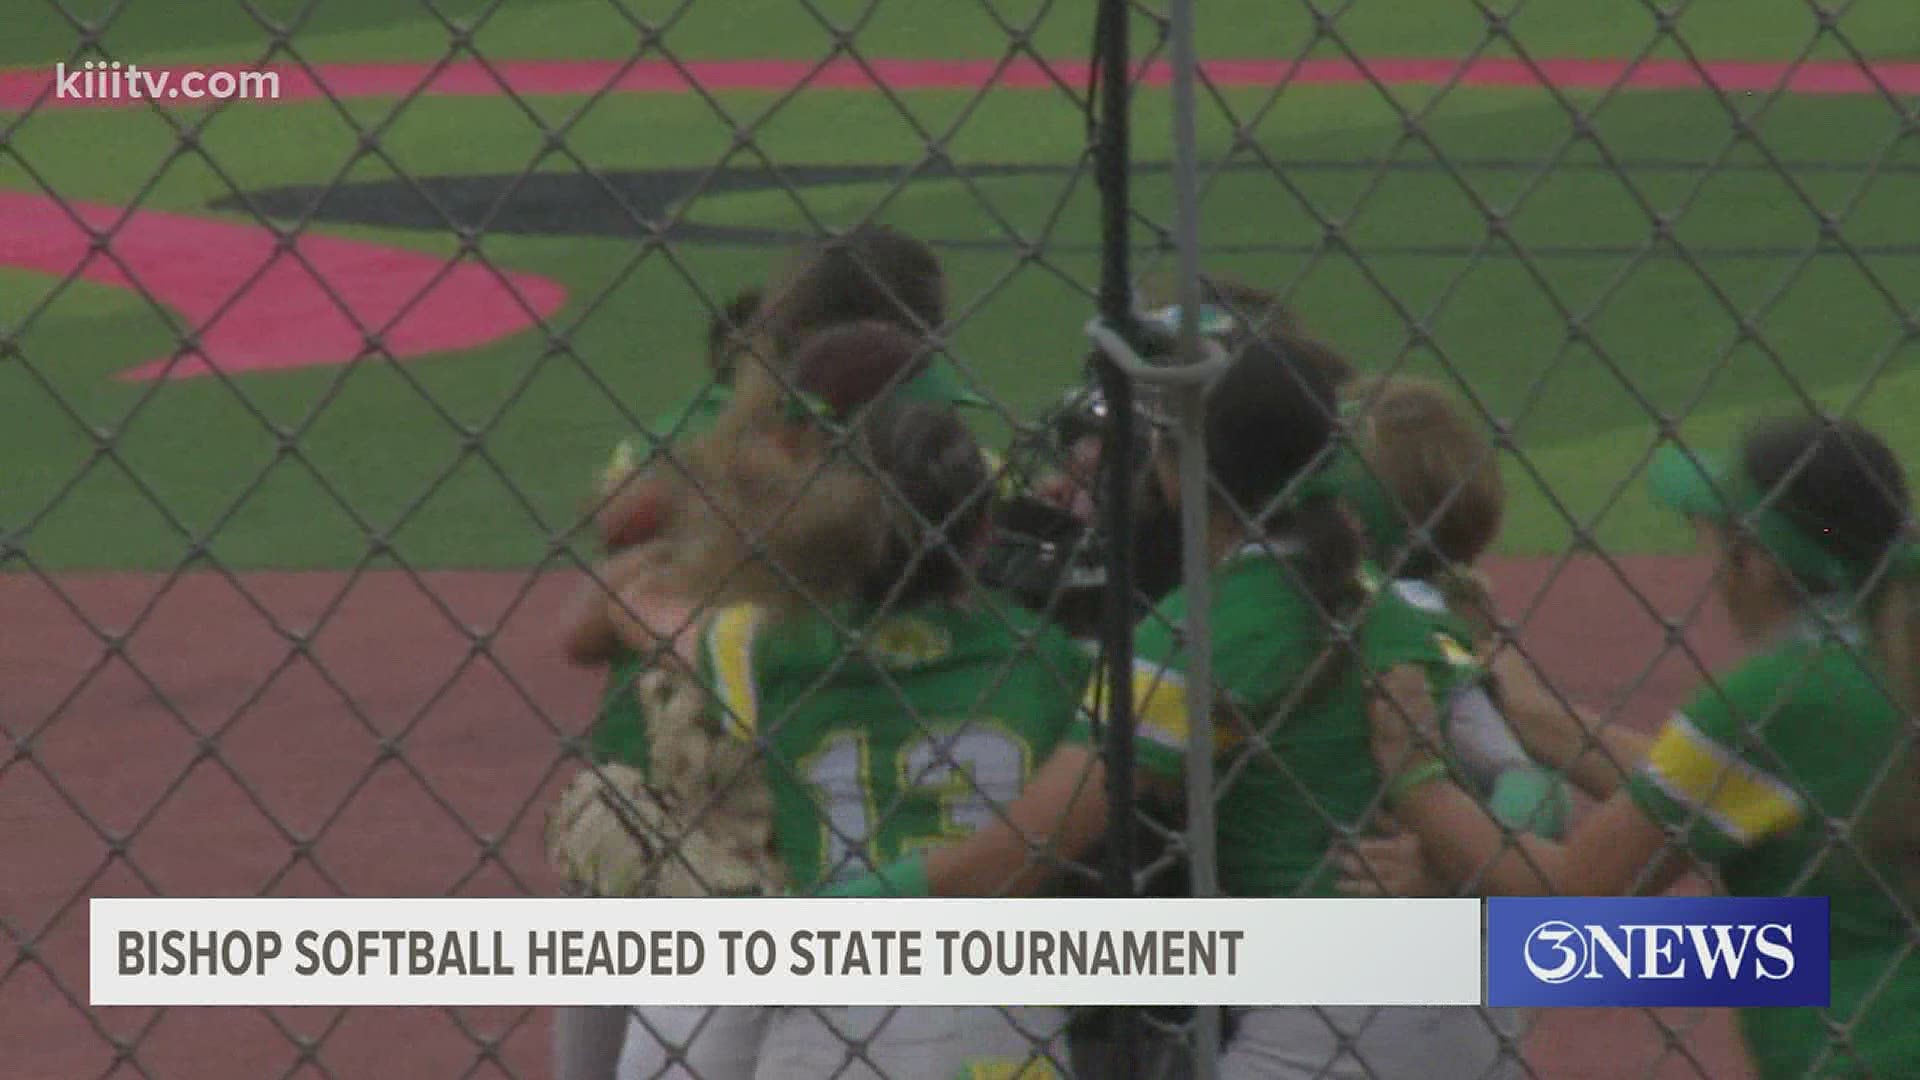 The Bishop Lady Badgers and Calallen Lady Cats will play in the state tournament next week in Austin.